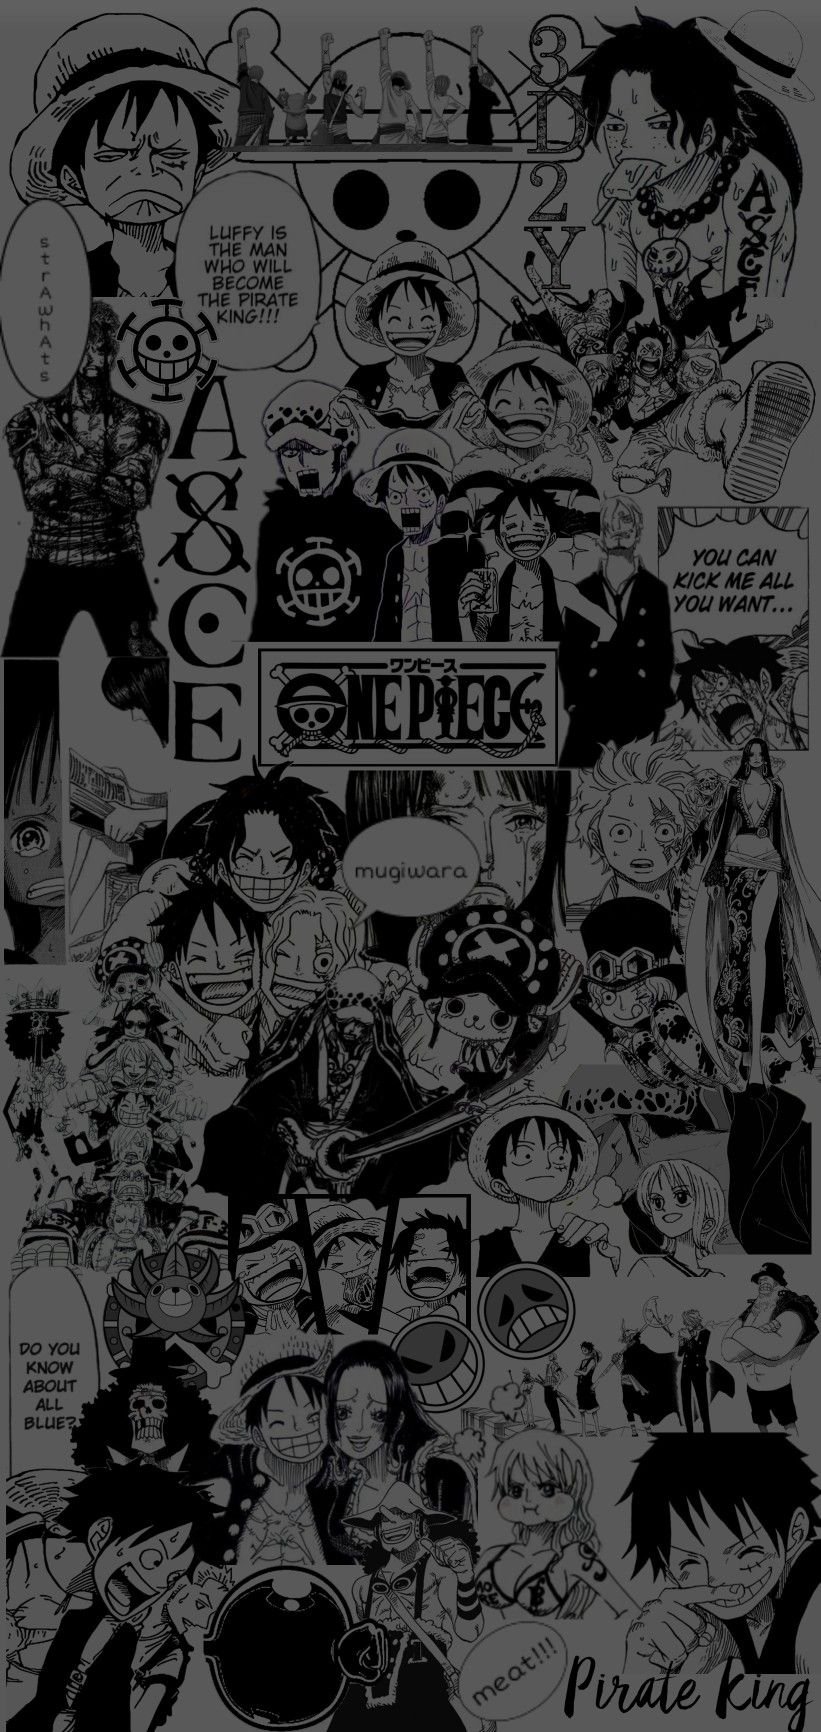 One Piece: How to Watch the Anime and Read the Manga | Den of Geek